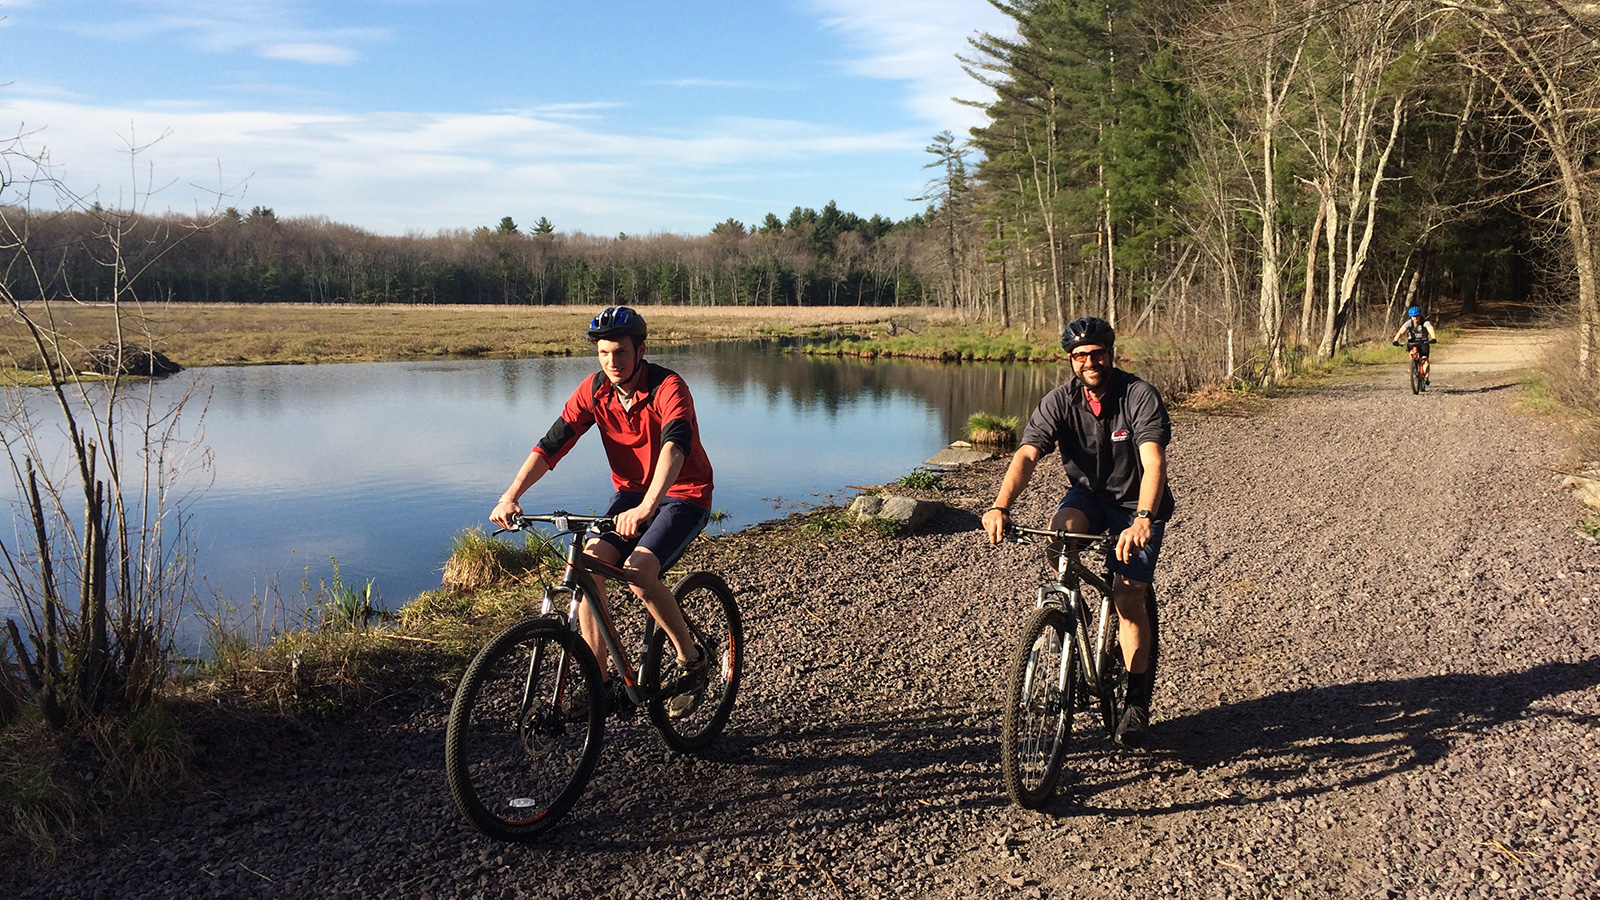 People riding mountain bikes in a wooded area next to a body of water.